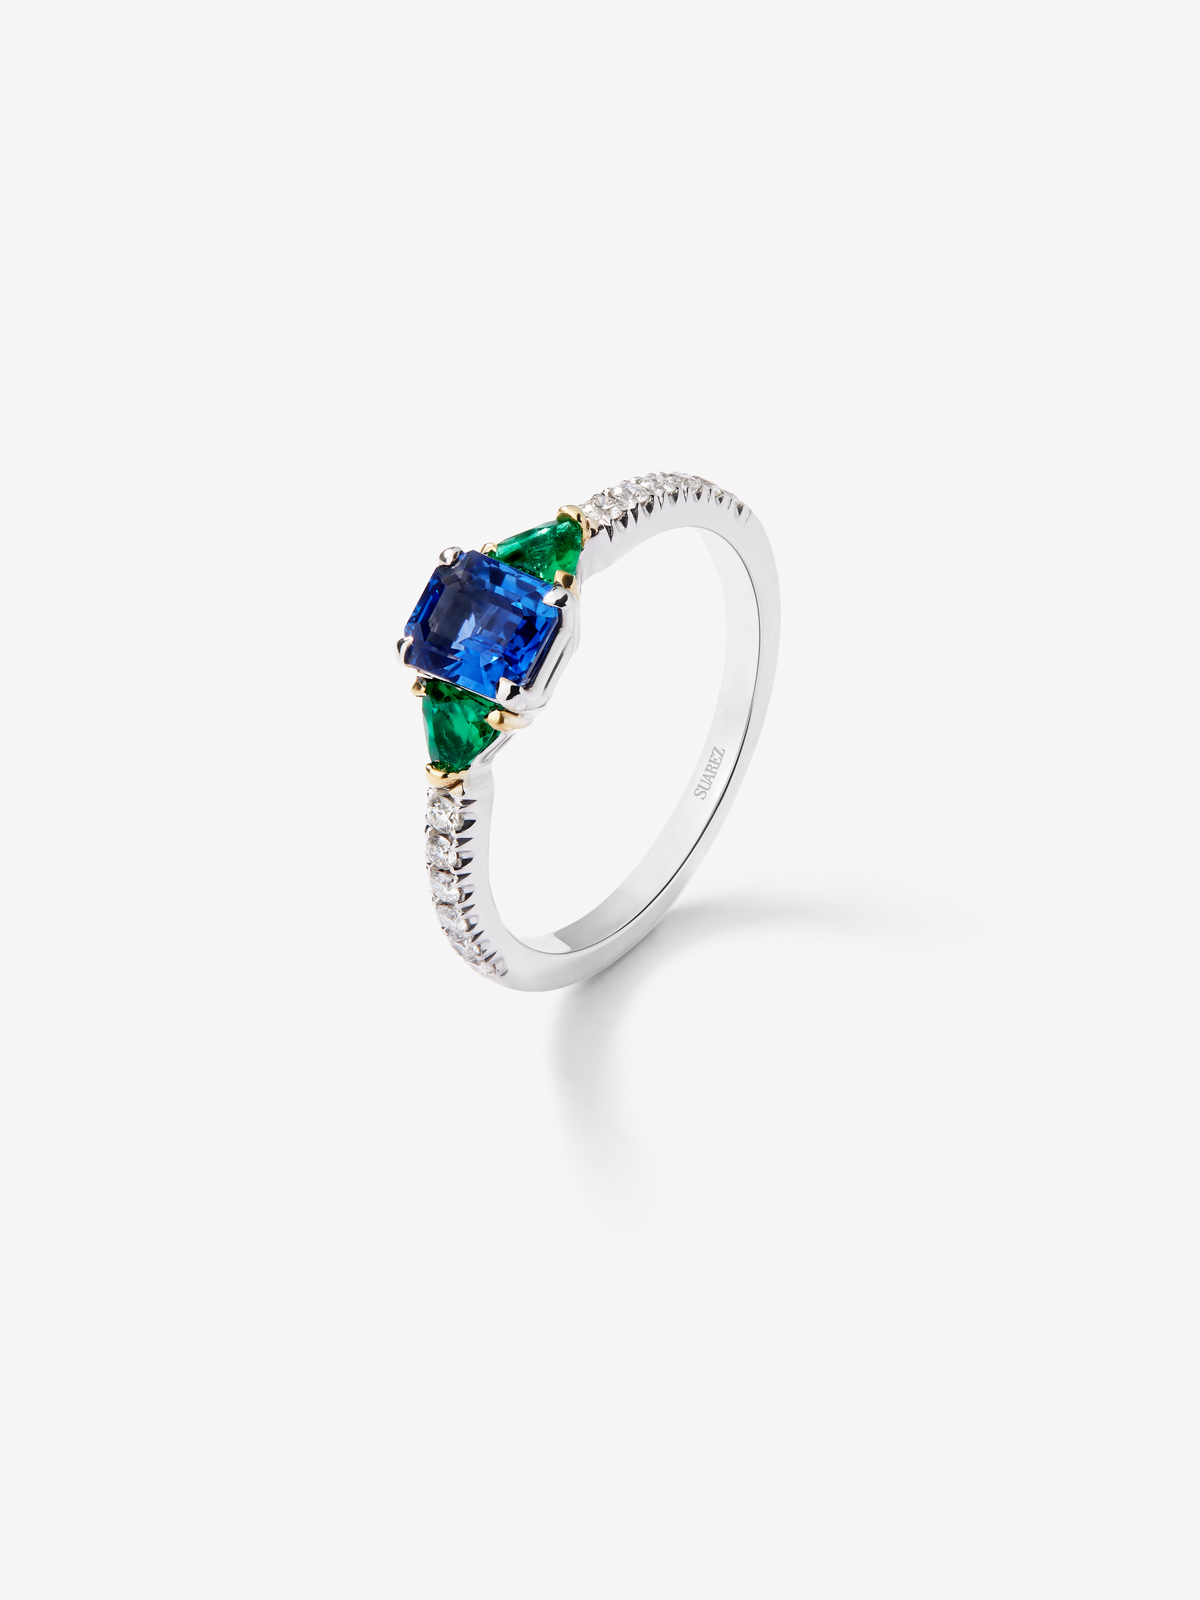 18K white gold ring with blue sapphire in octagonal size of 0.94 cts, green emeralds in 0.22 cts and white diamonds in a bright size of 0.028 cts